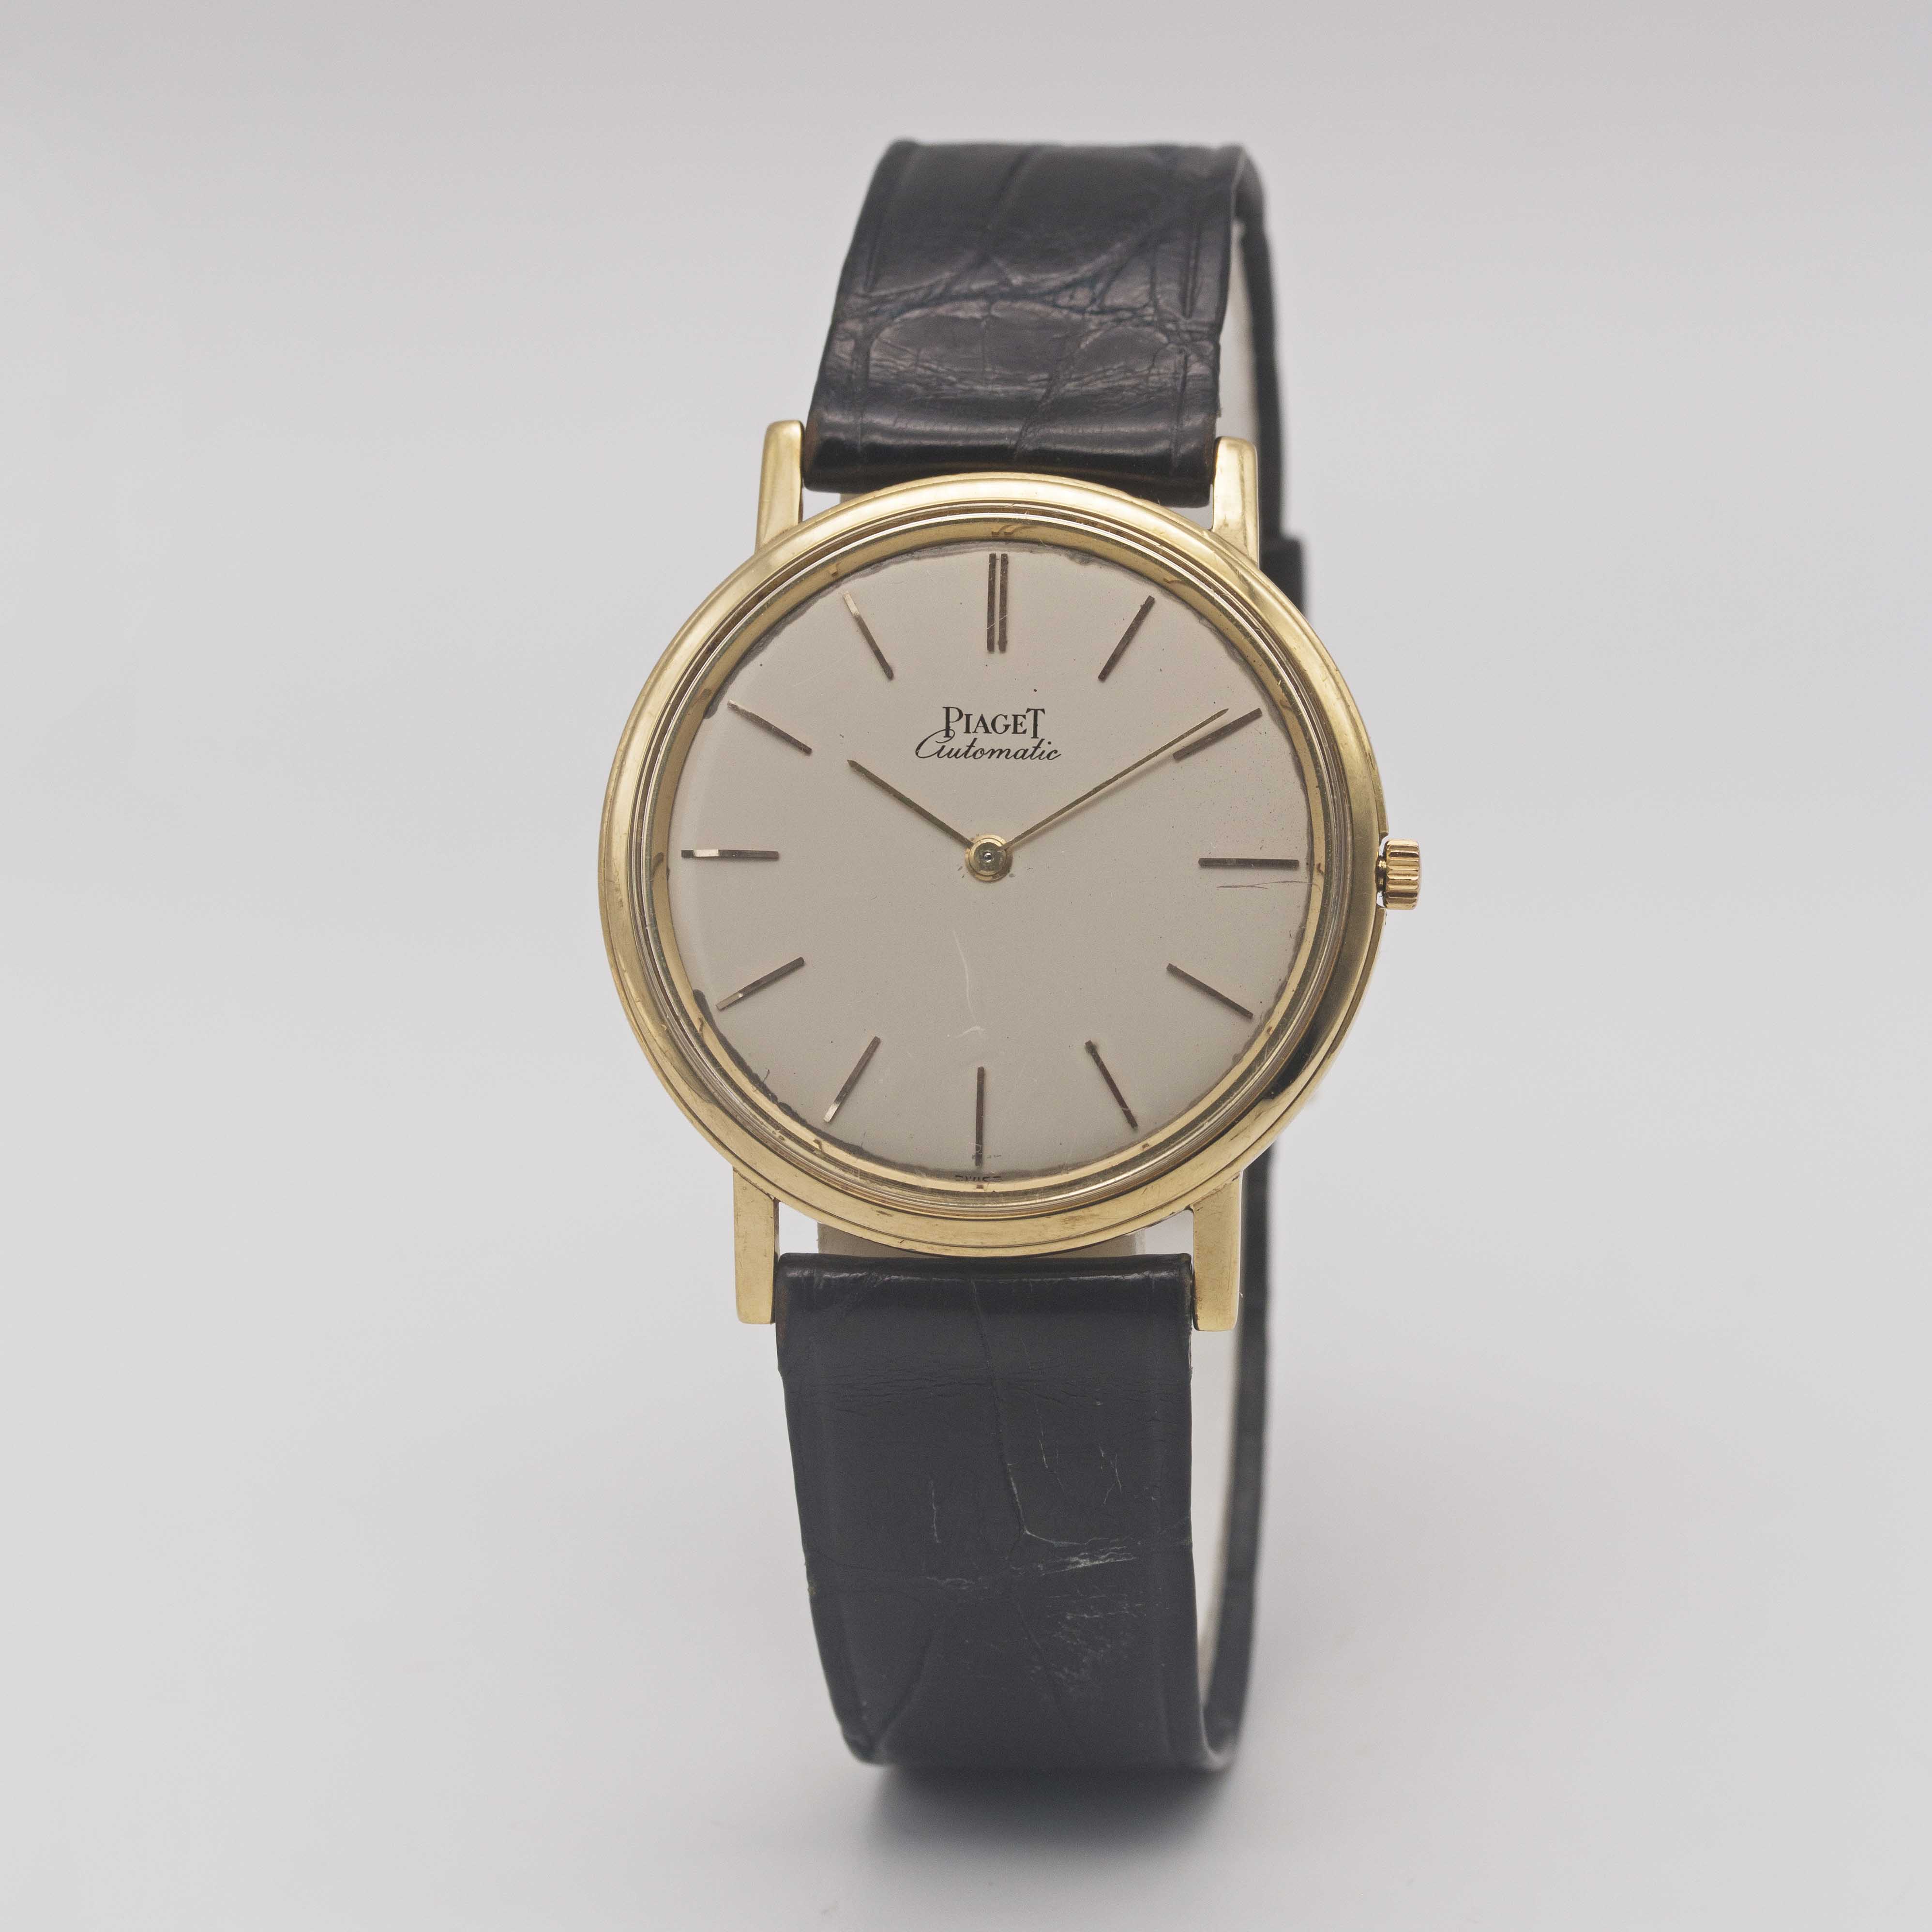 A GENTLEMAN'S 18K SOLID YELLOW GOLD PIAGET "ULTRA THIN" AUTOMATIC WRIST WATCH CIRCA 1970s, REF. - Image 4 of 8